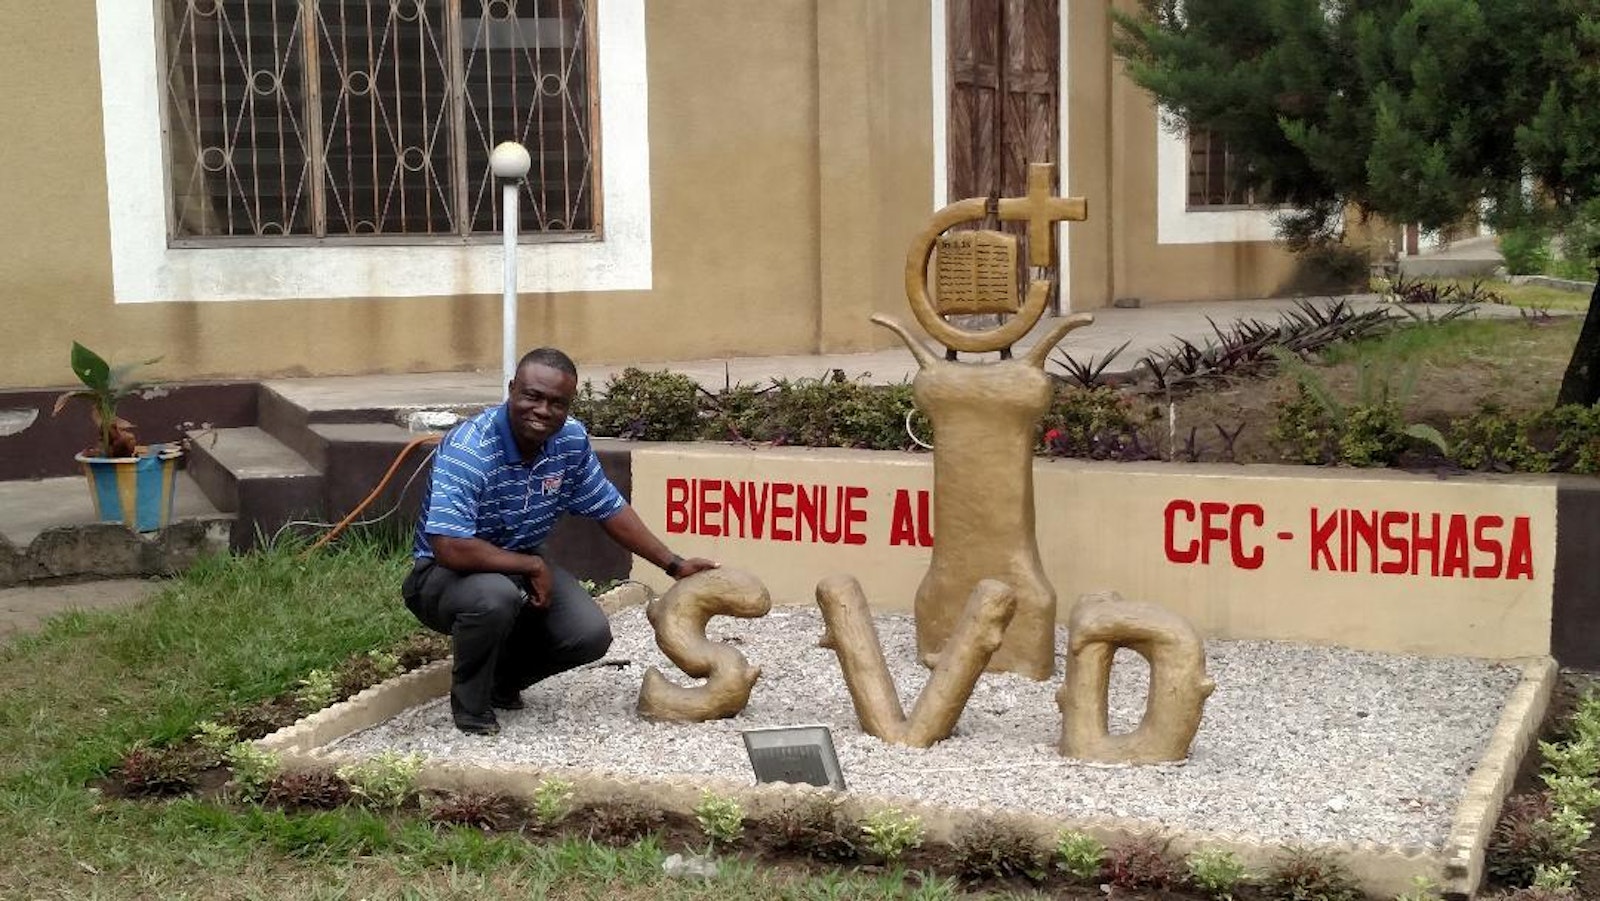 Fr. Jean Ikanga poses for a photo outside the complex where he lives with his religious community, the Society of the Divine Word, in the central African nation of the Congo.